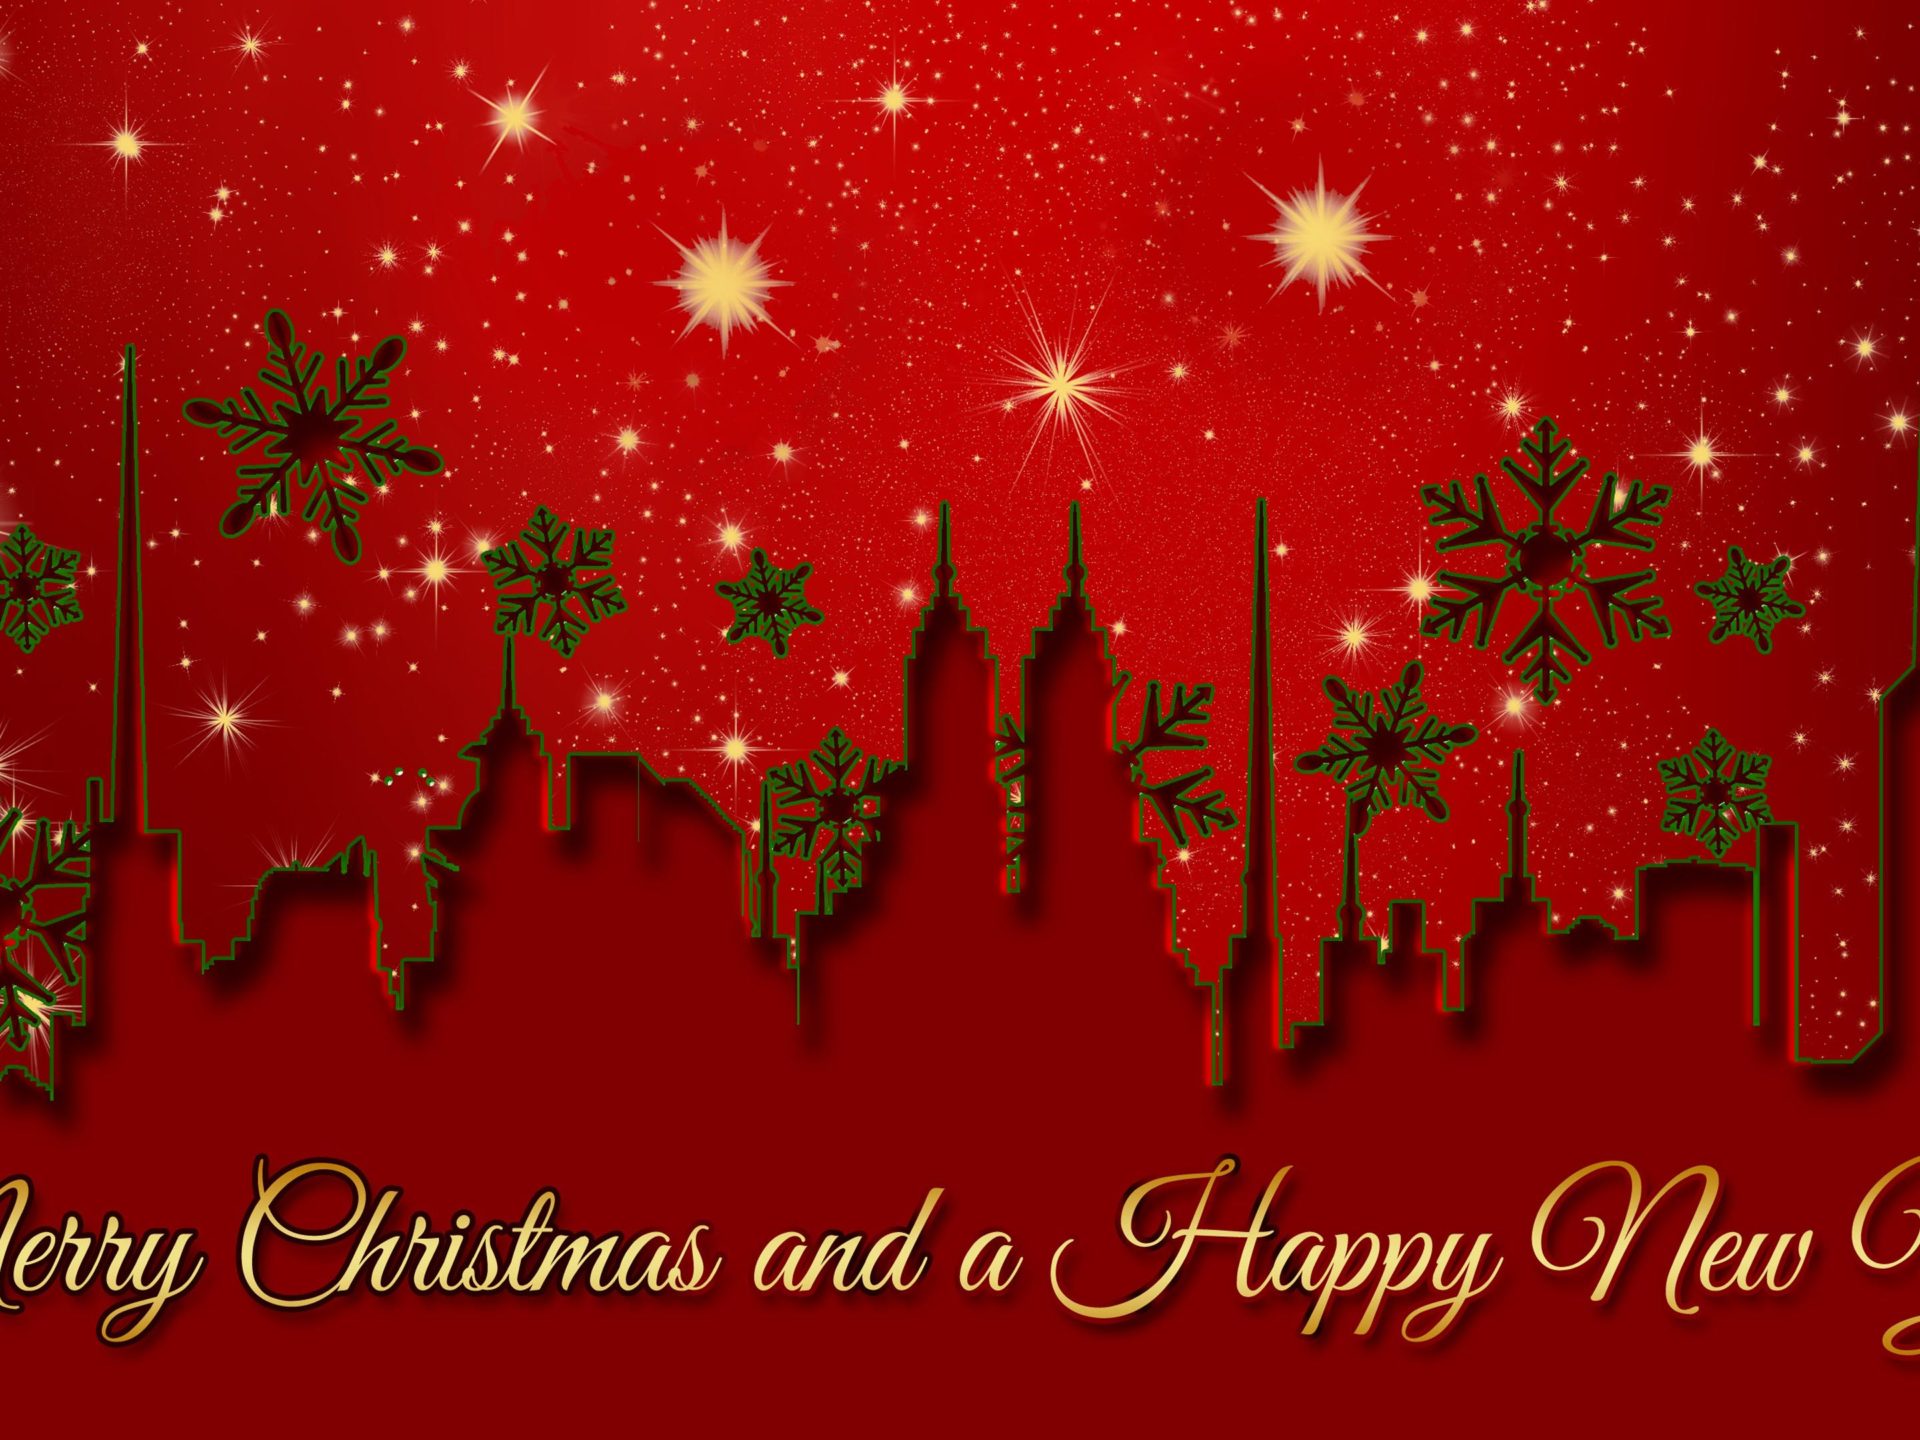 Merry Christmas Best Wishes Image For Friends Family